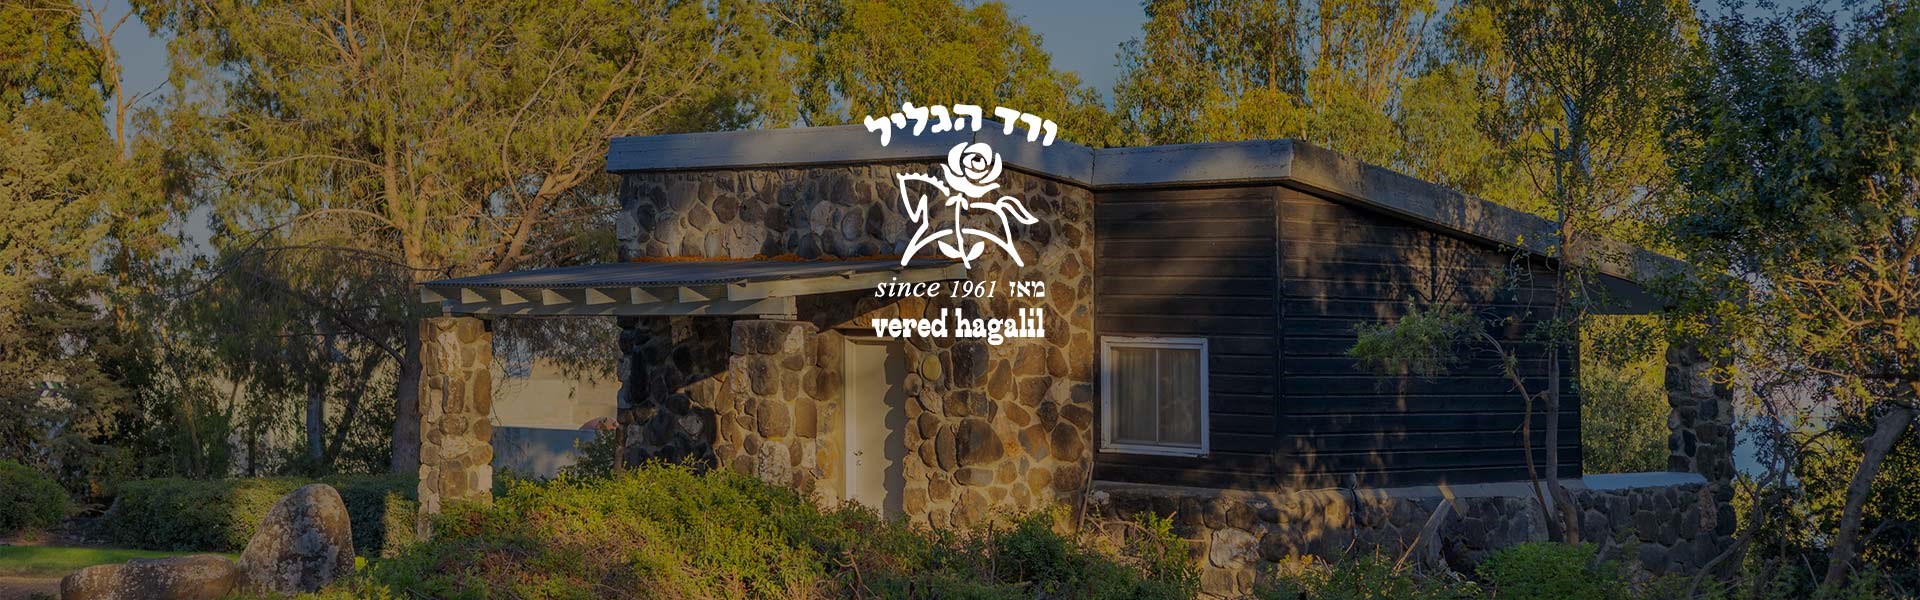 Vered Hagalil Guest Farm - Guest rooms and vacatio